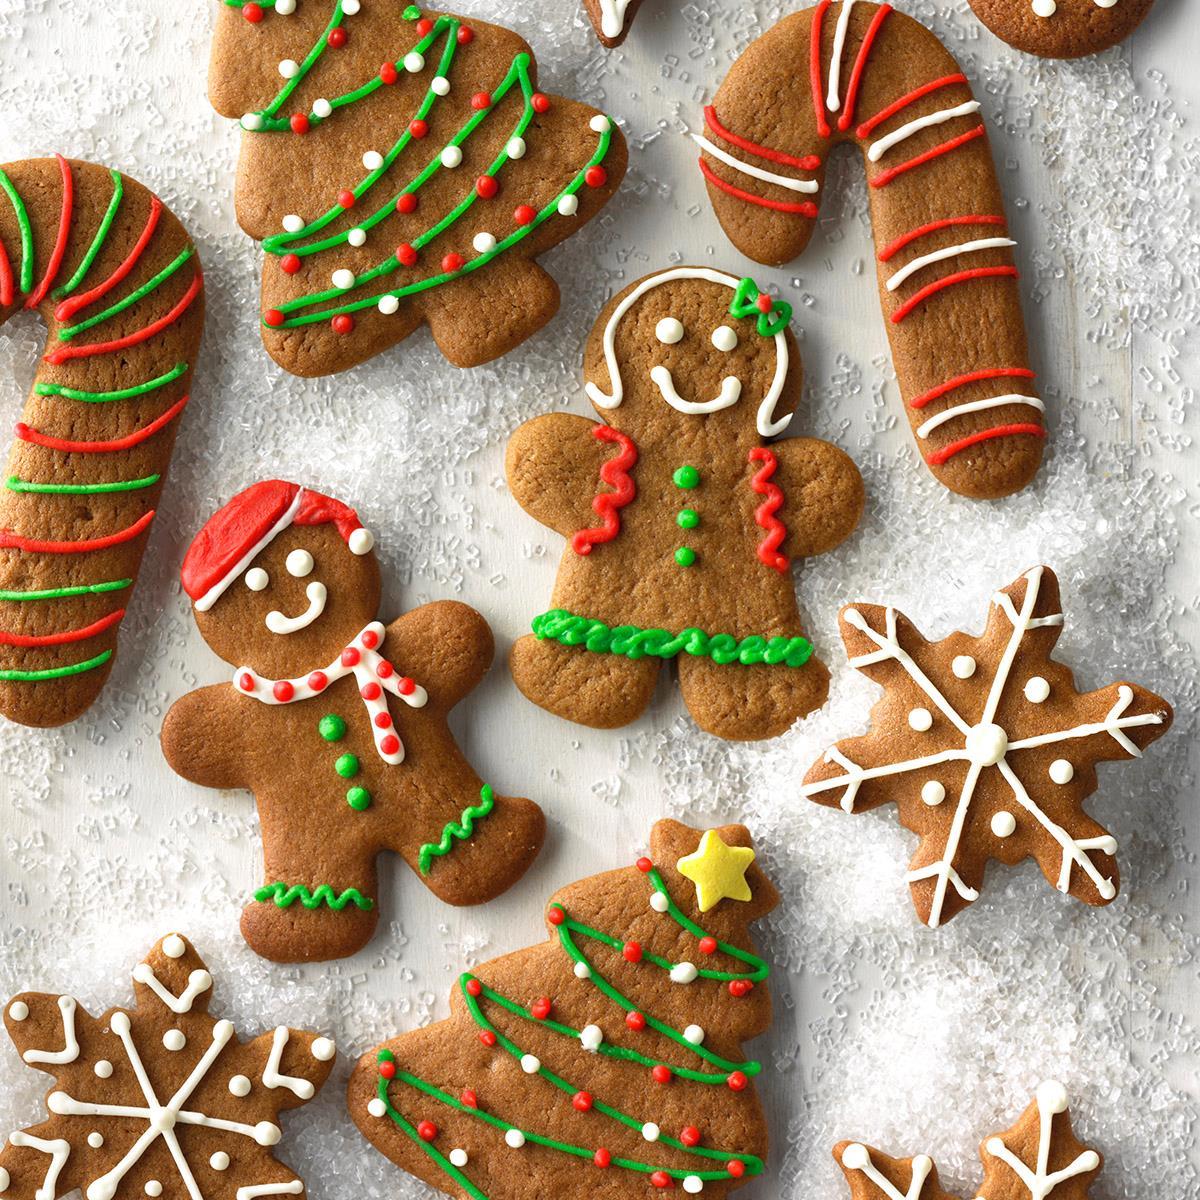 Kids in the Kitchen: Gingerbread Cookie Decorating | Harborfields ...